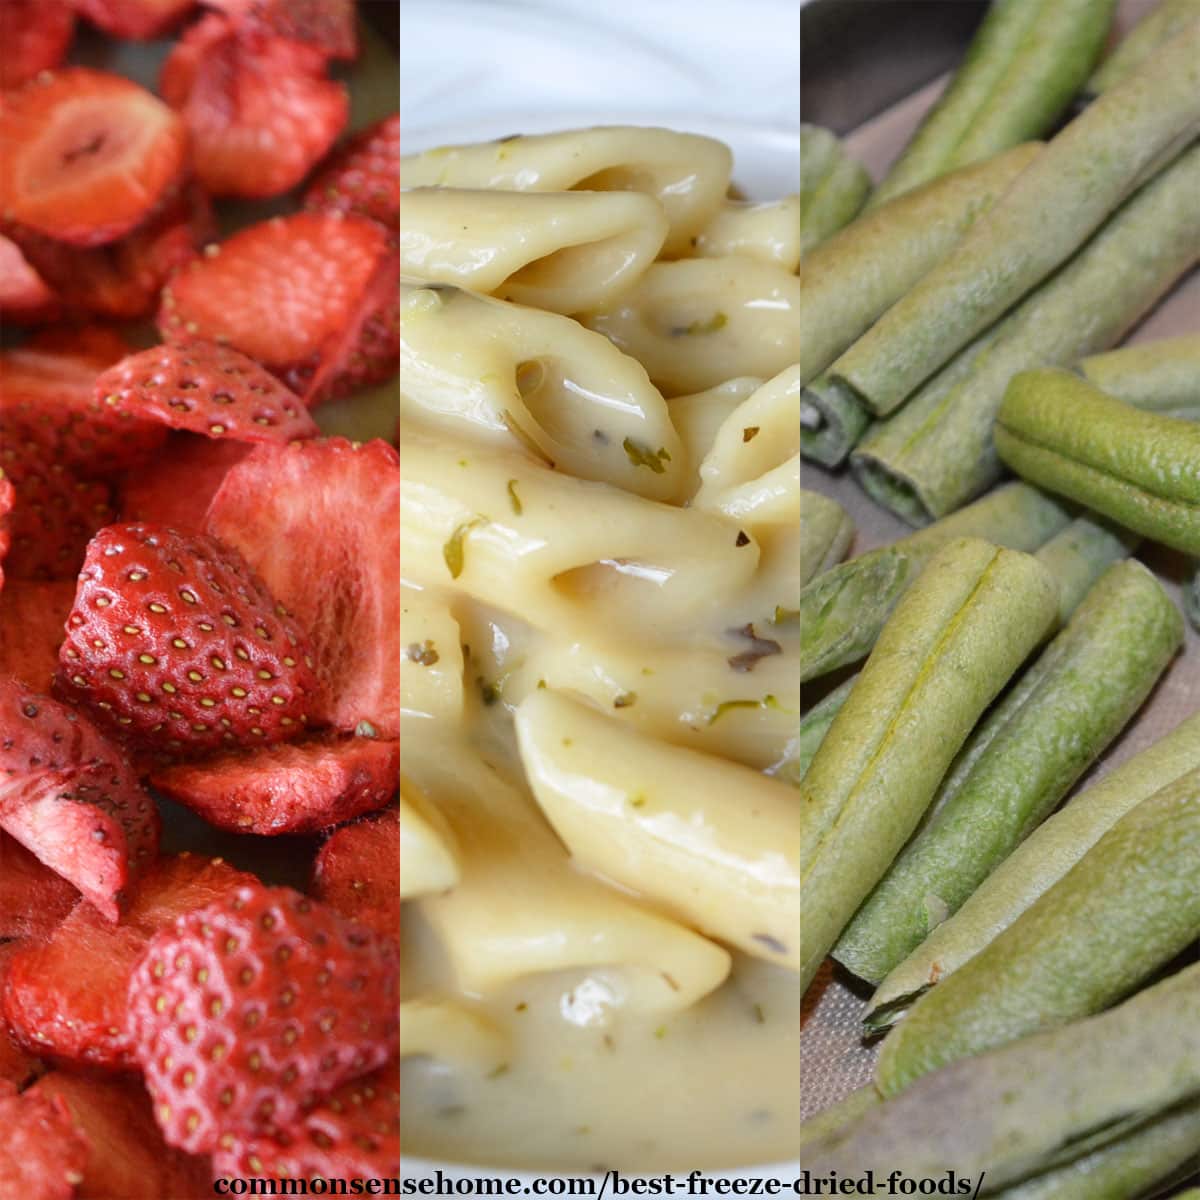 freeze dried foods - strawberries, pasta, green beans